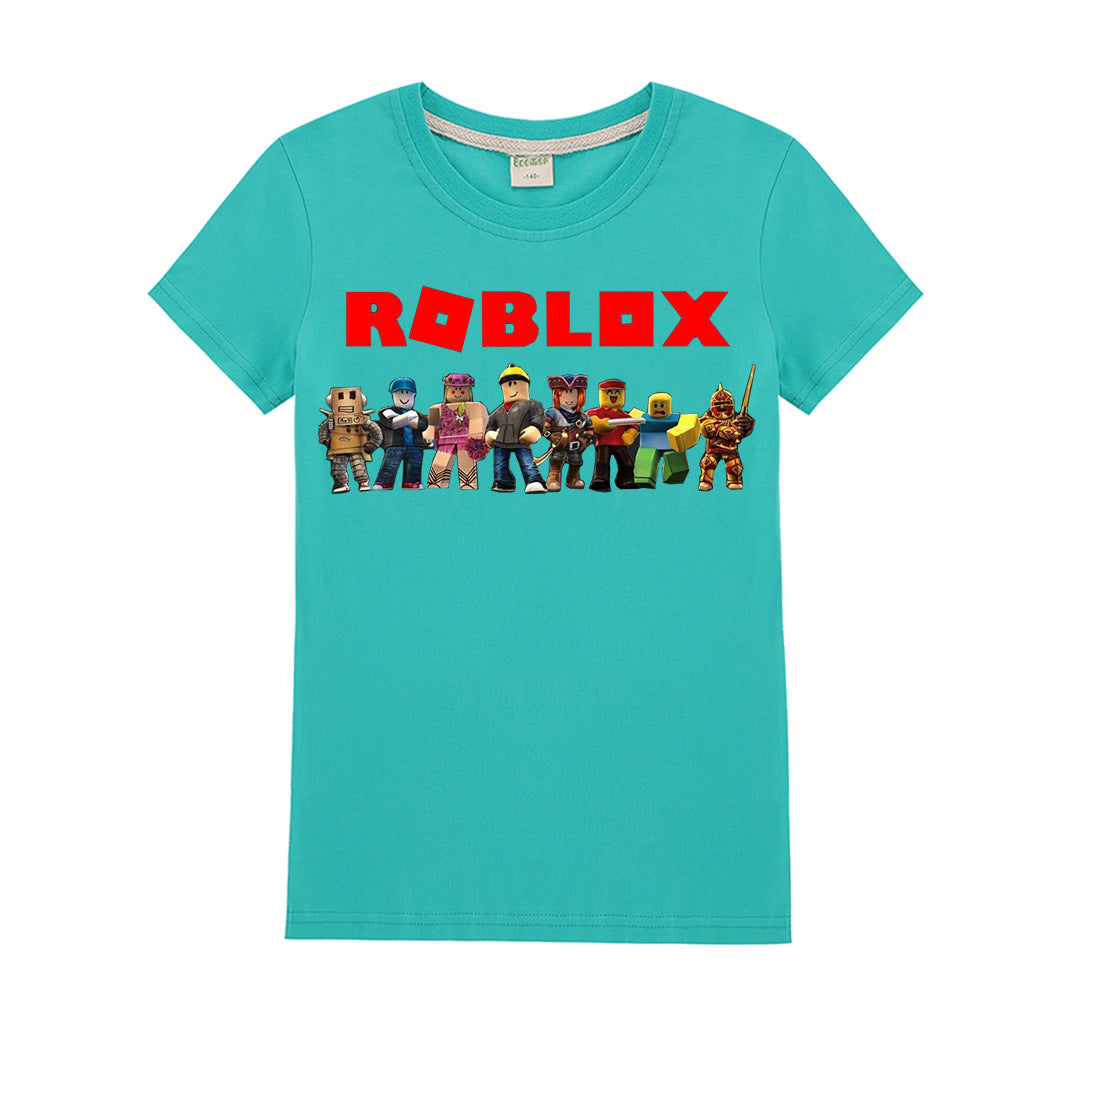 Roblox T Shirt For Boys And Girls Nfgoods - green shirt with backpack roblox